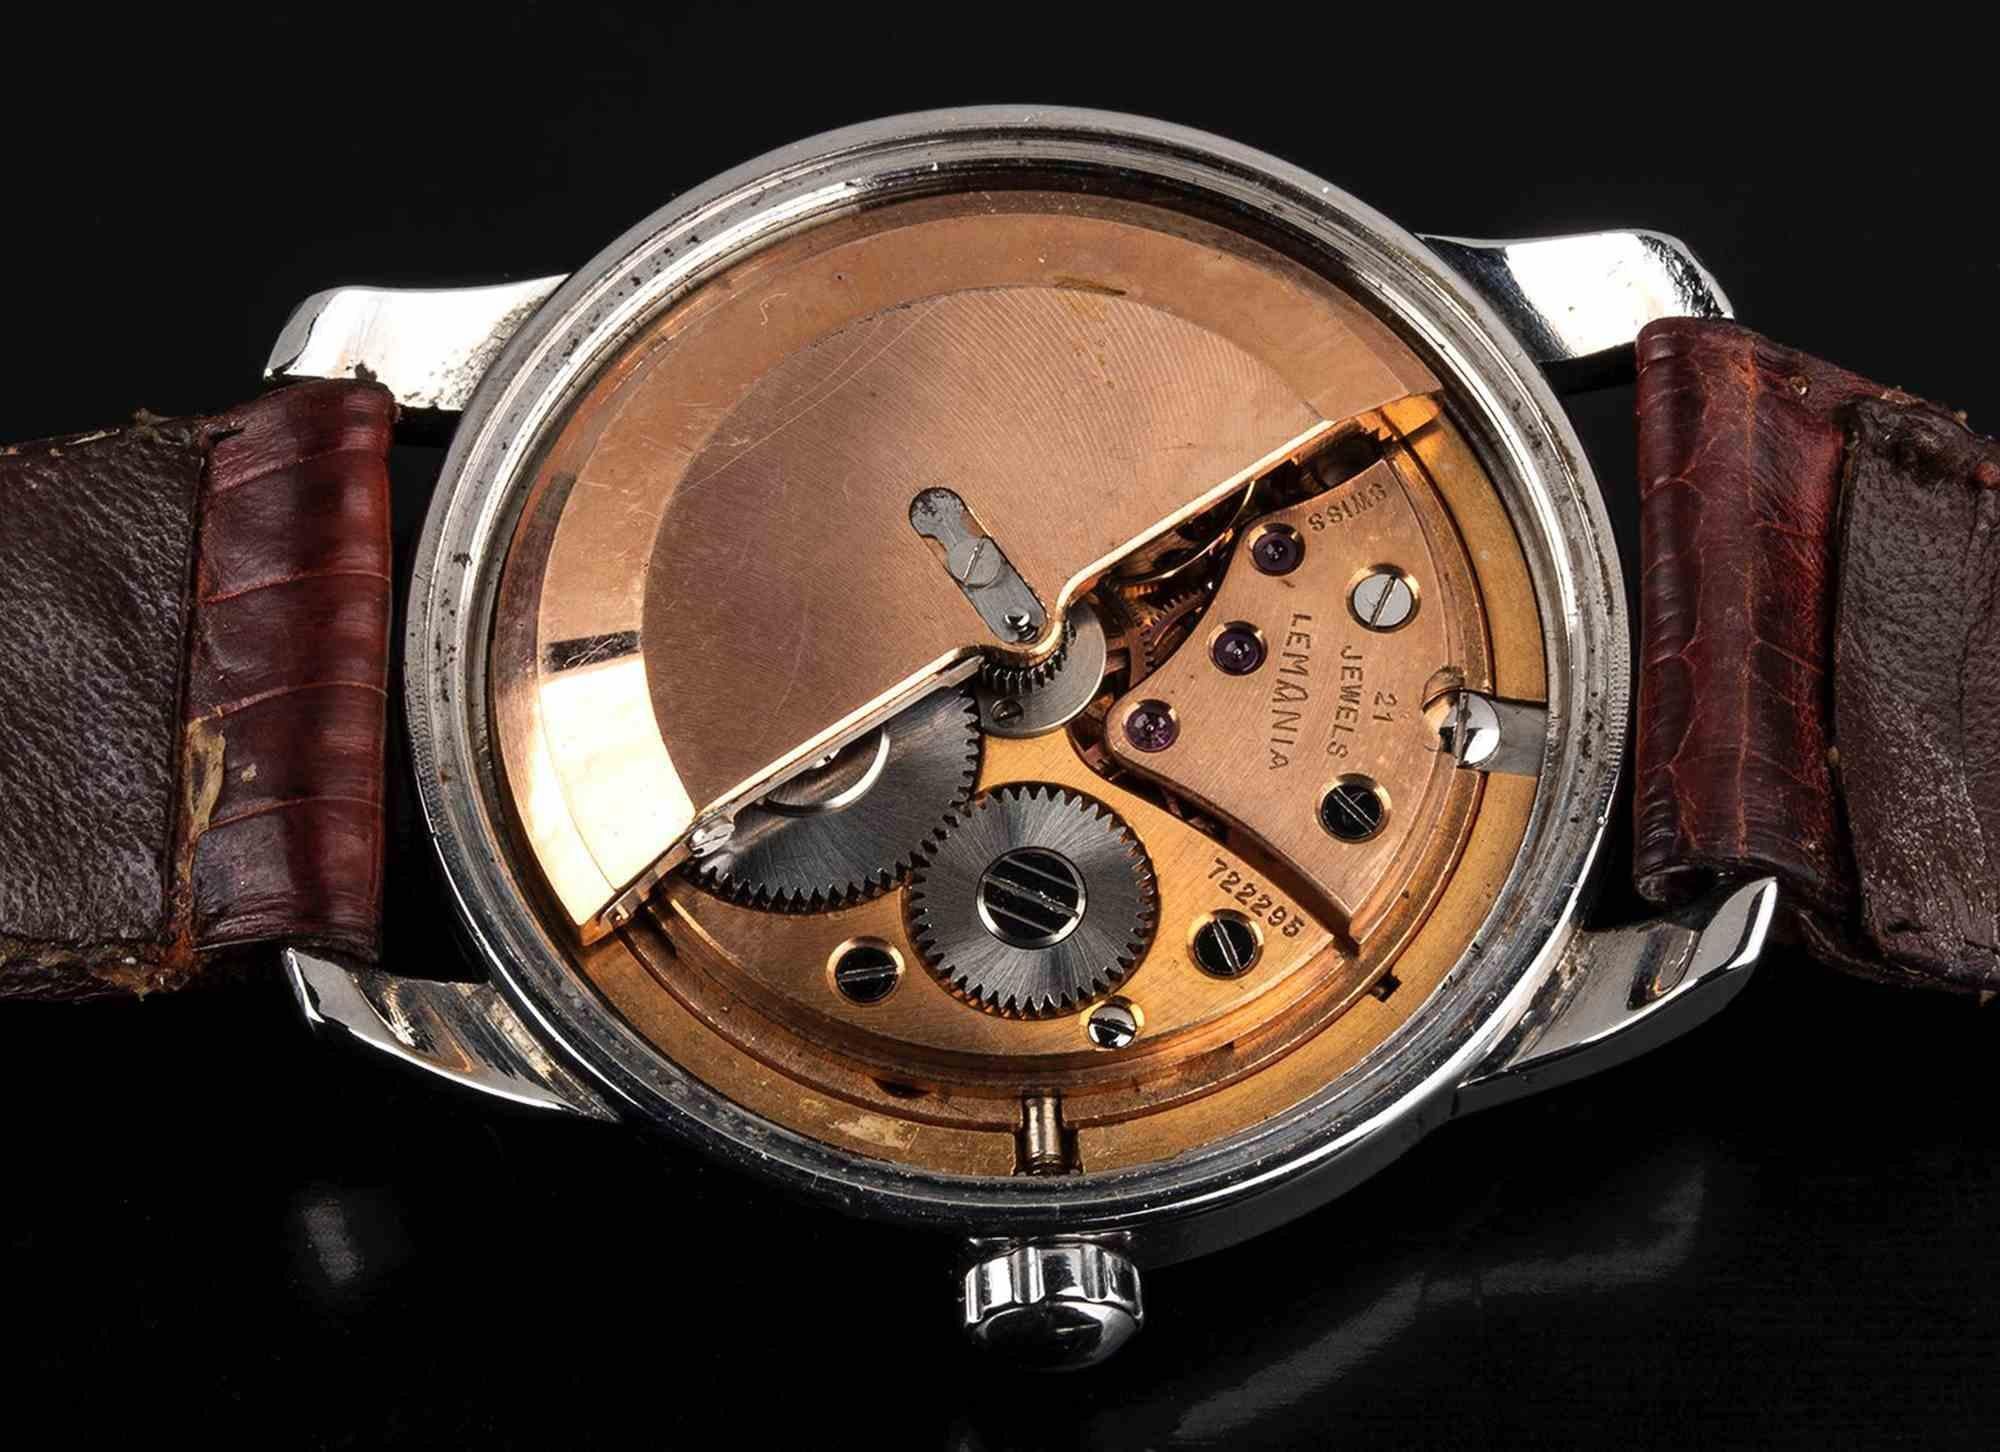 Lemania Automatic - Watch 1950s

Movement: self-winding  cal. 3600 21 jewels 
Case: stainless steel  35 mm screw back
Dial: white slightly tropical  rose gold indexes 
Features: Case, dial and movement signed
RARE